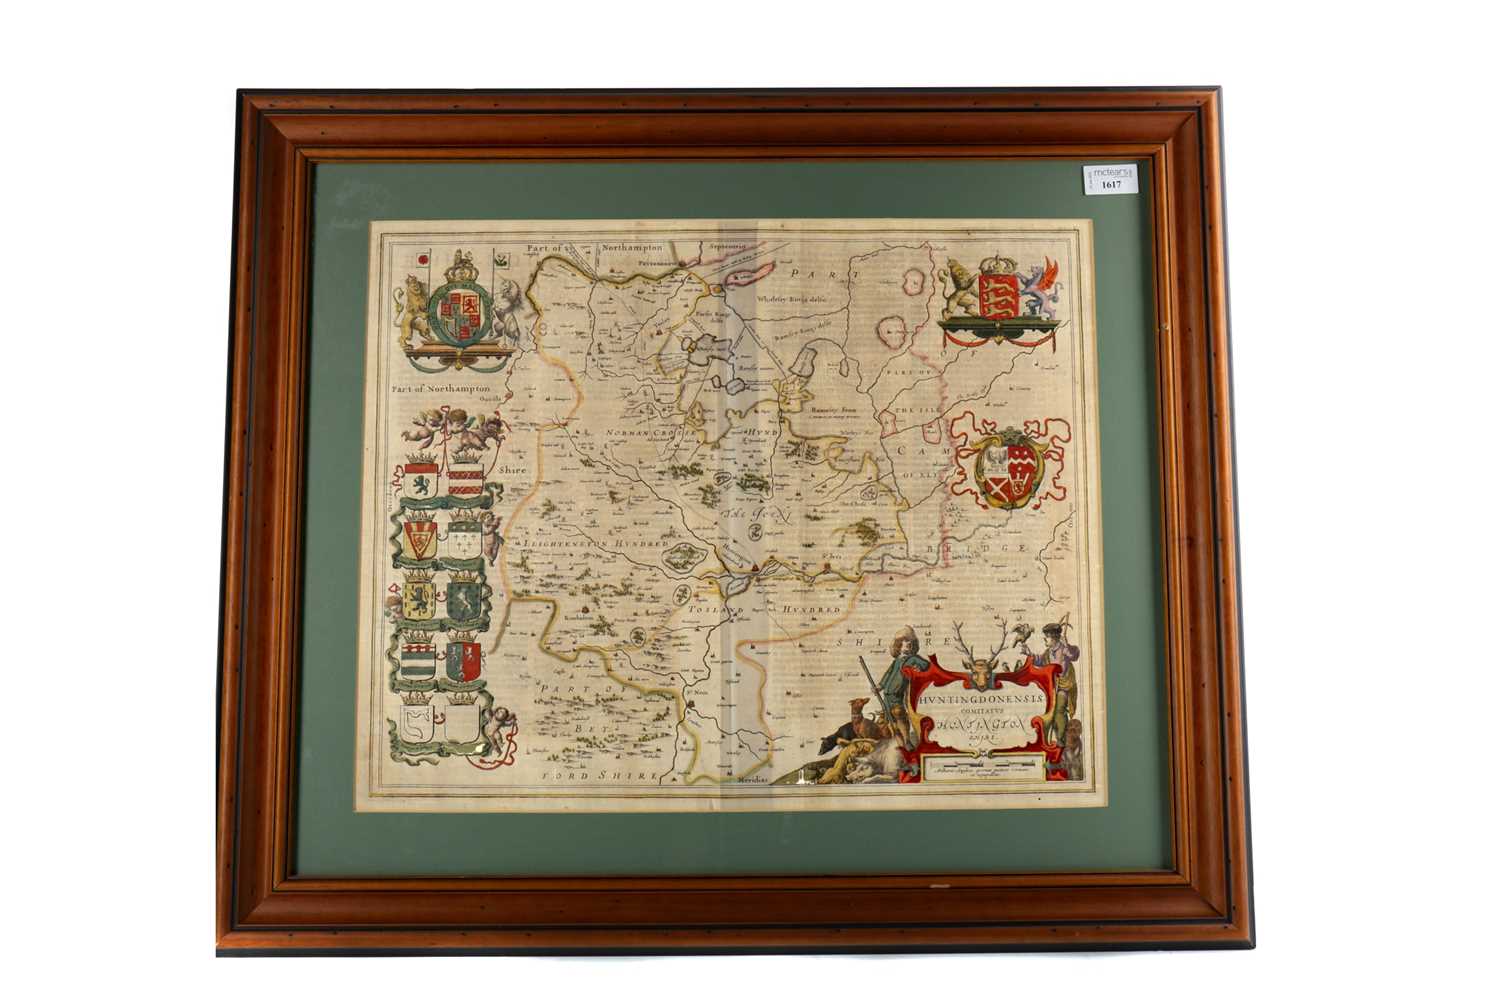 Lot 1617 - AN 18TH CENTURY MAP OF HUNTINGTONSHIRE